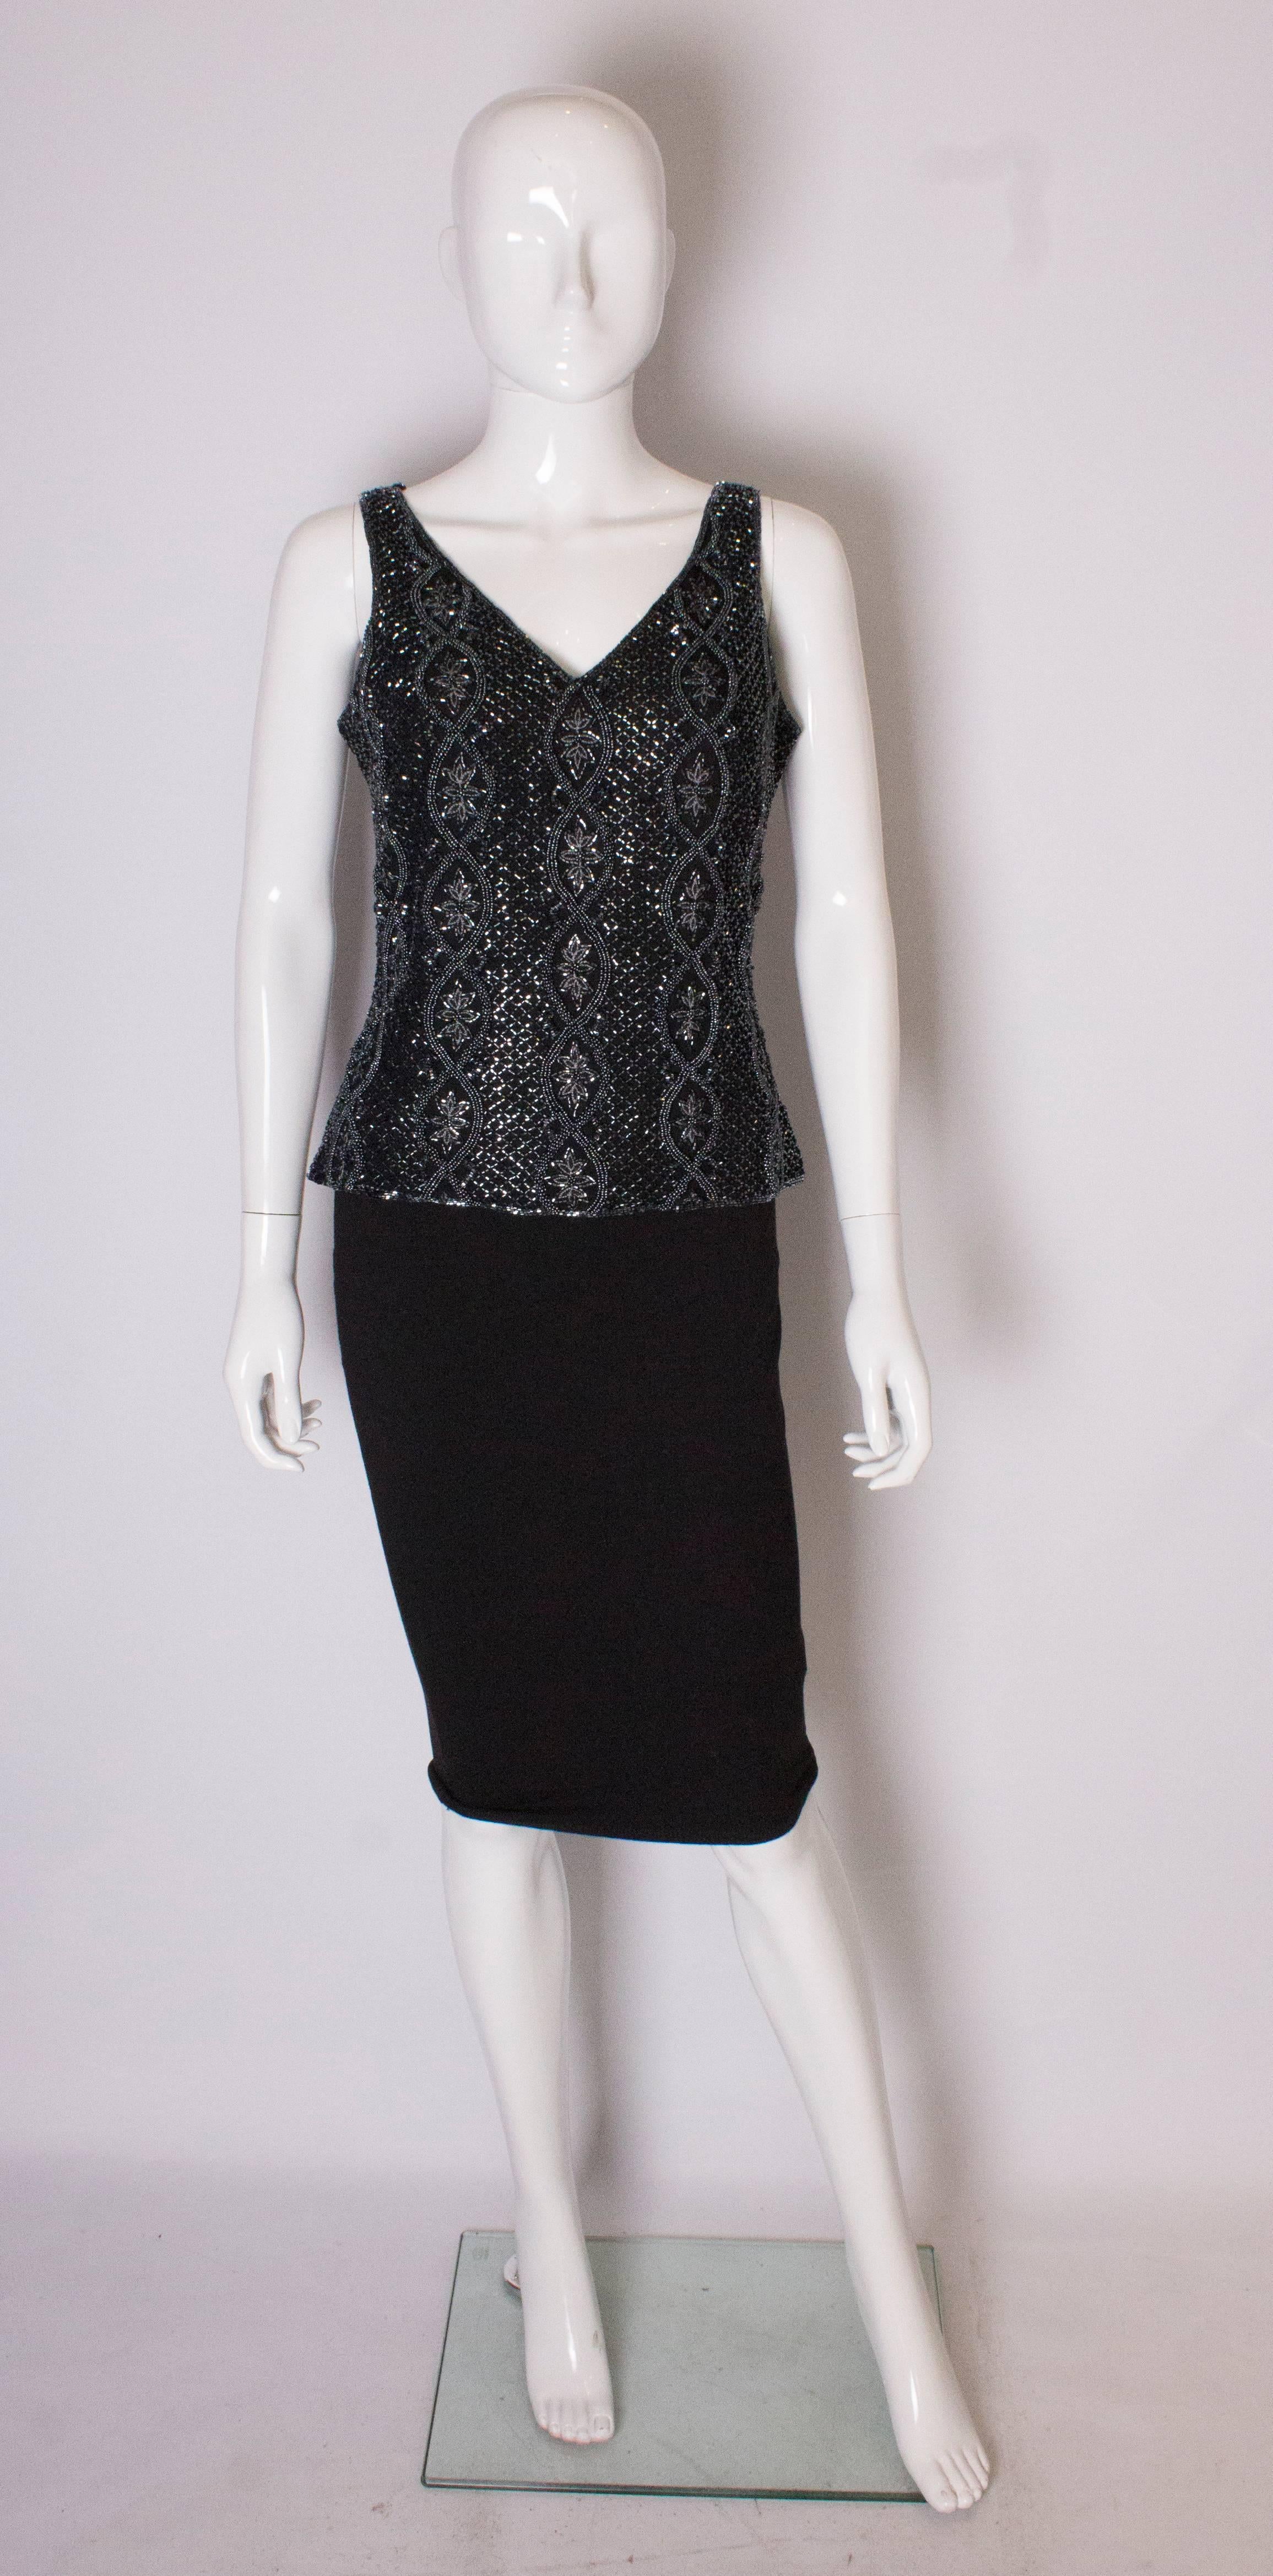 A chic evening top by Adrianna Papelle. The top has a v neckline front and back , with beading in a floral design and in vertical columns.  it has  a central back zip.